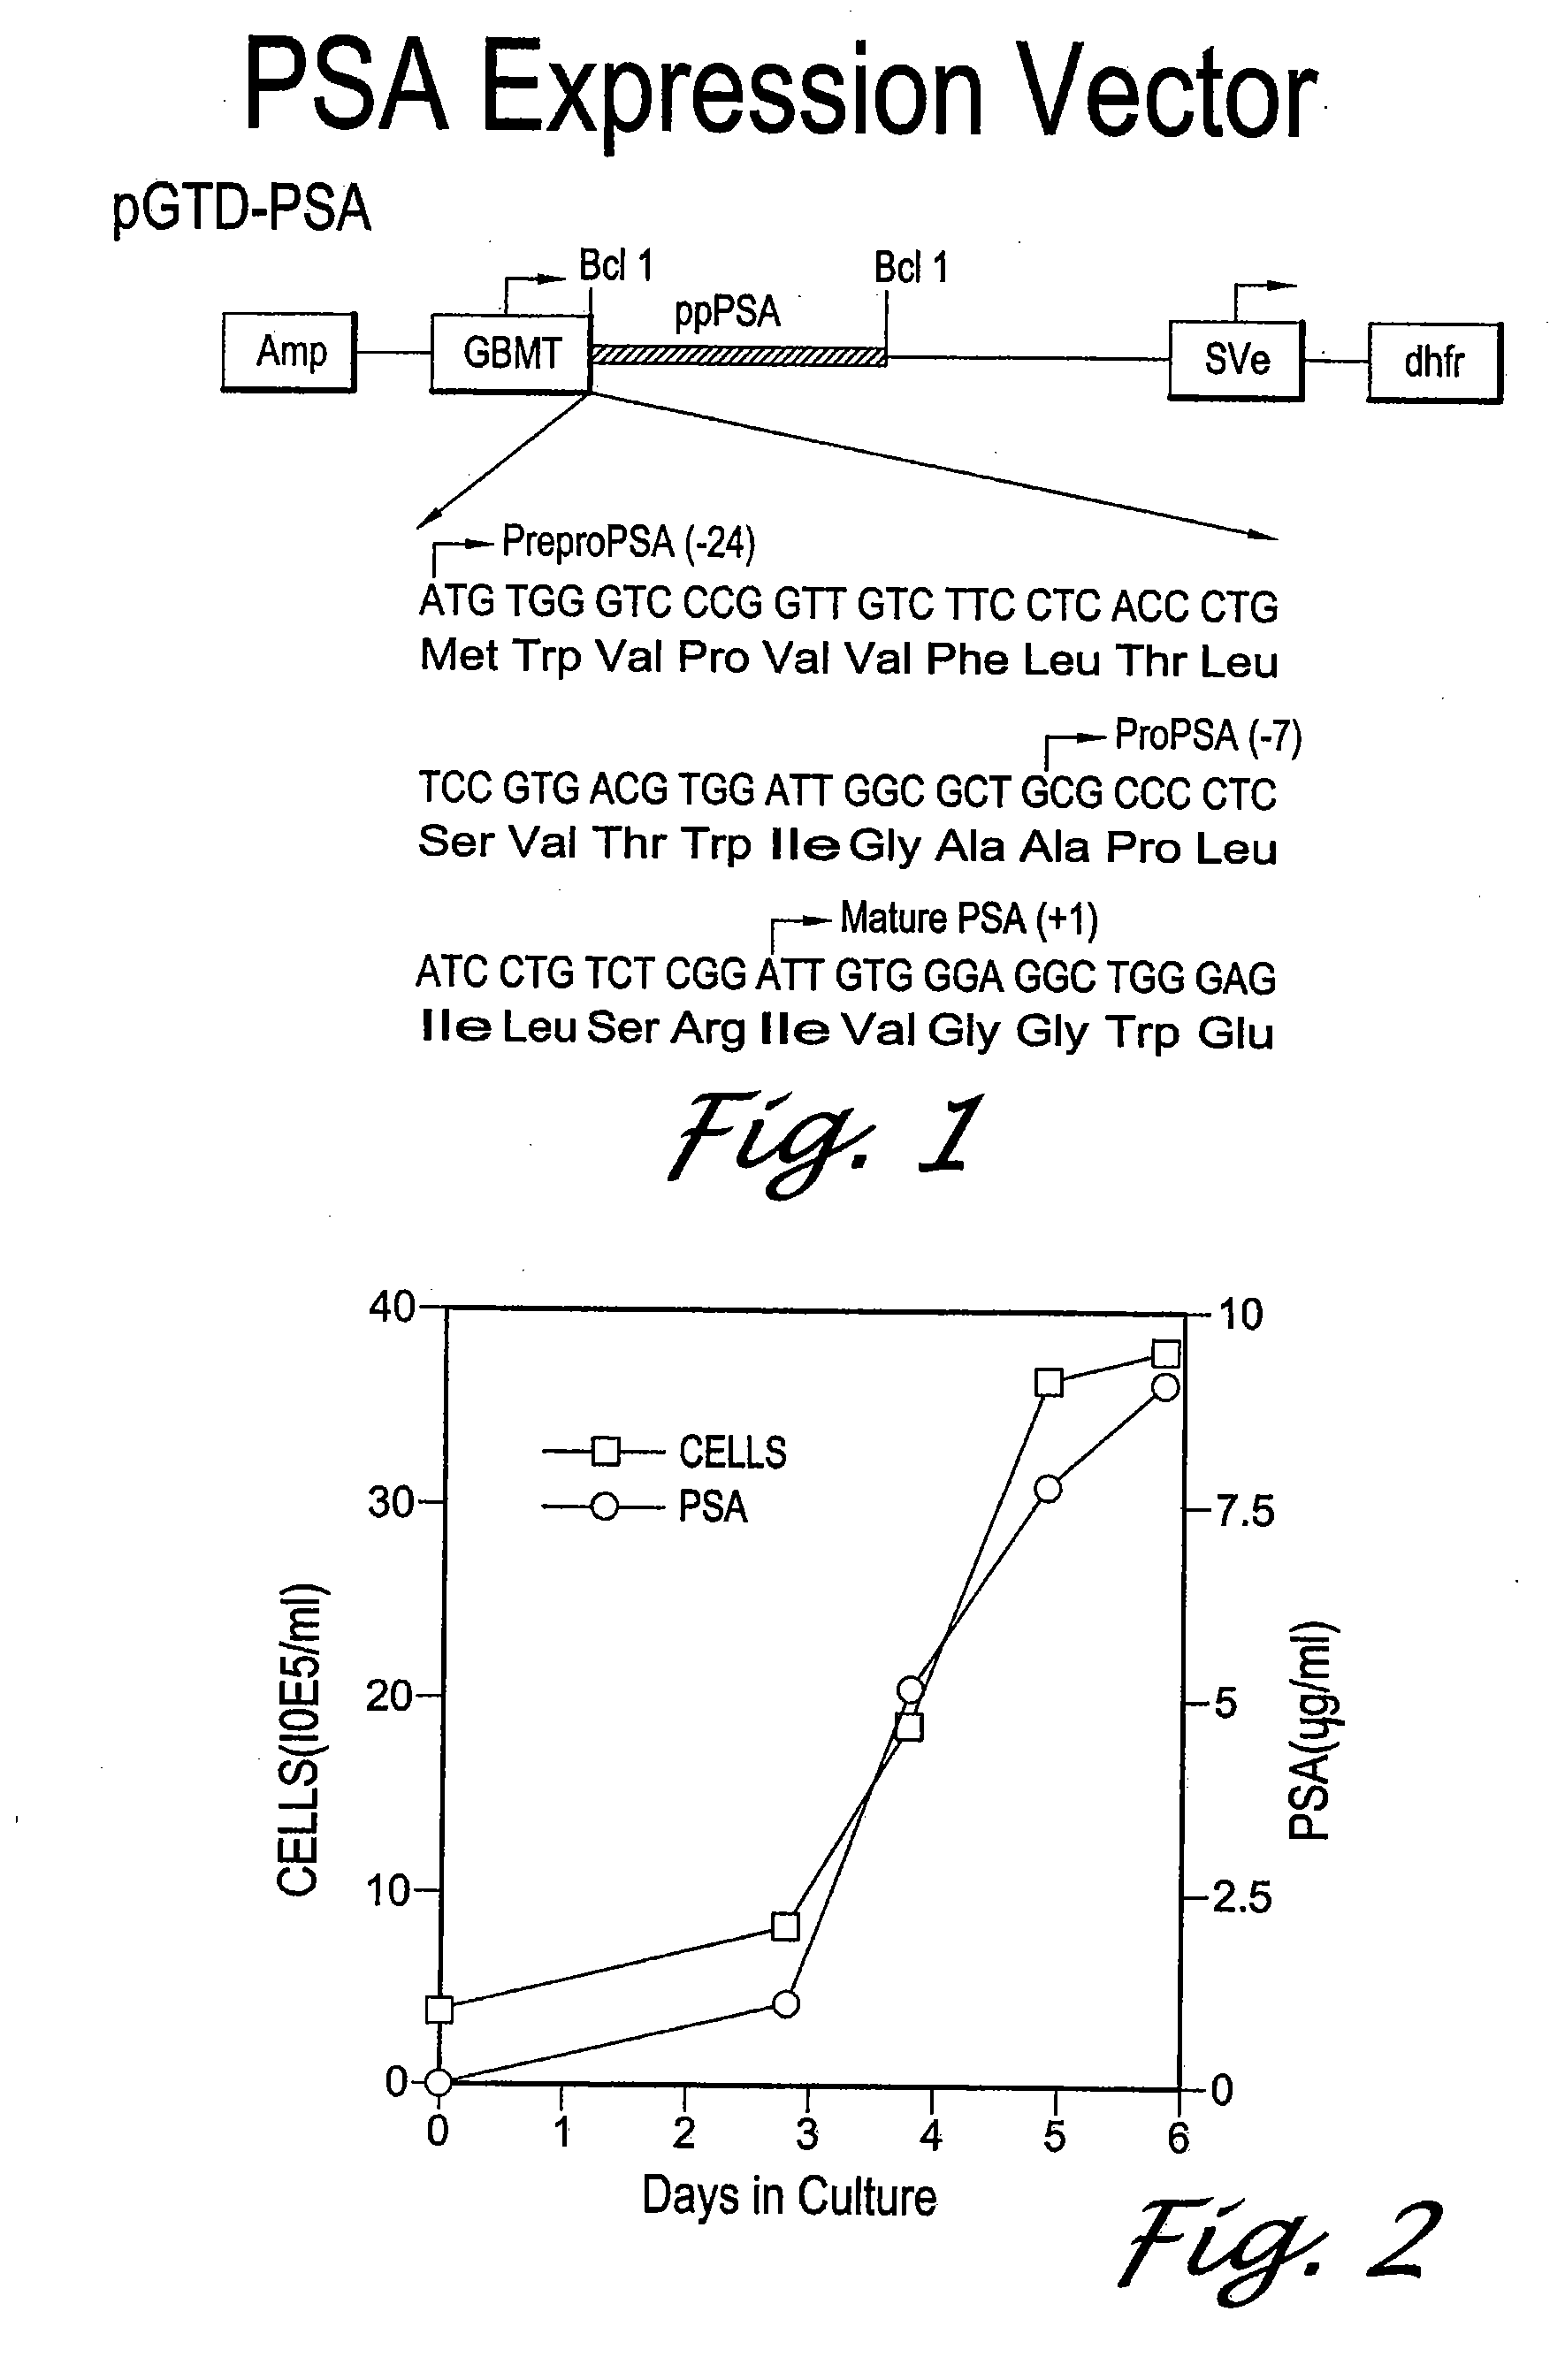 Forms of Prostate Specific Antigens and Methods for their Detection